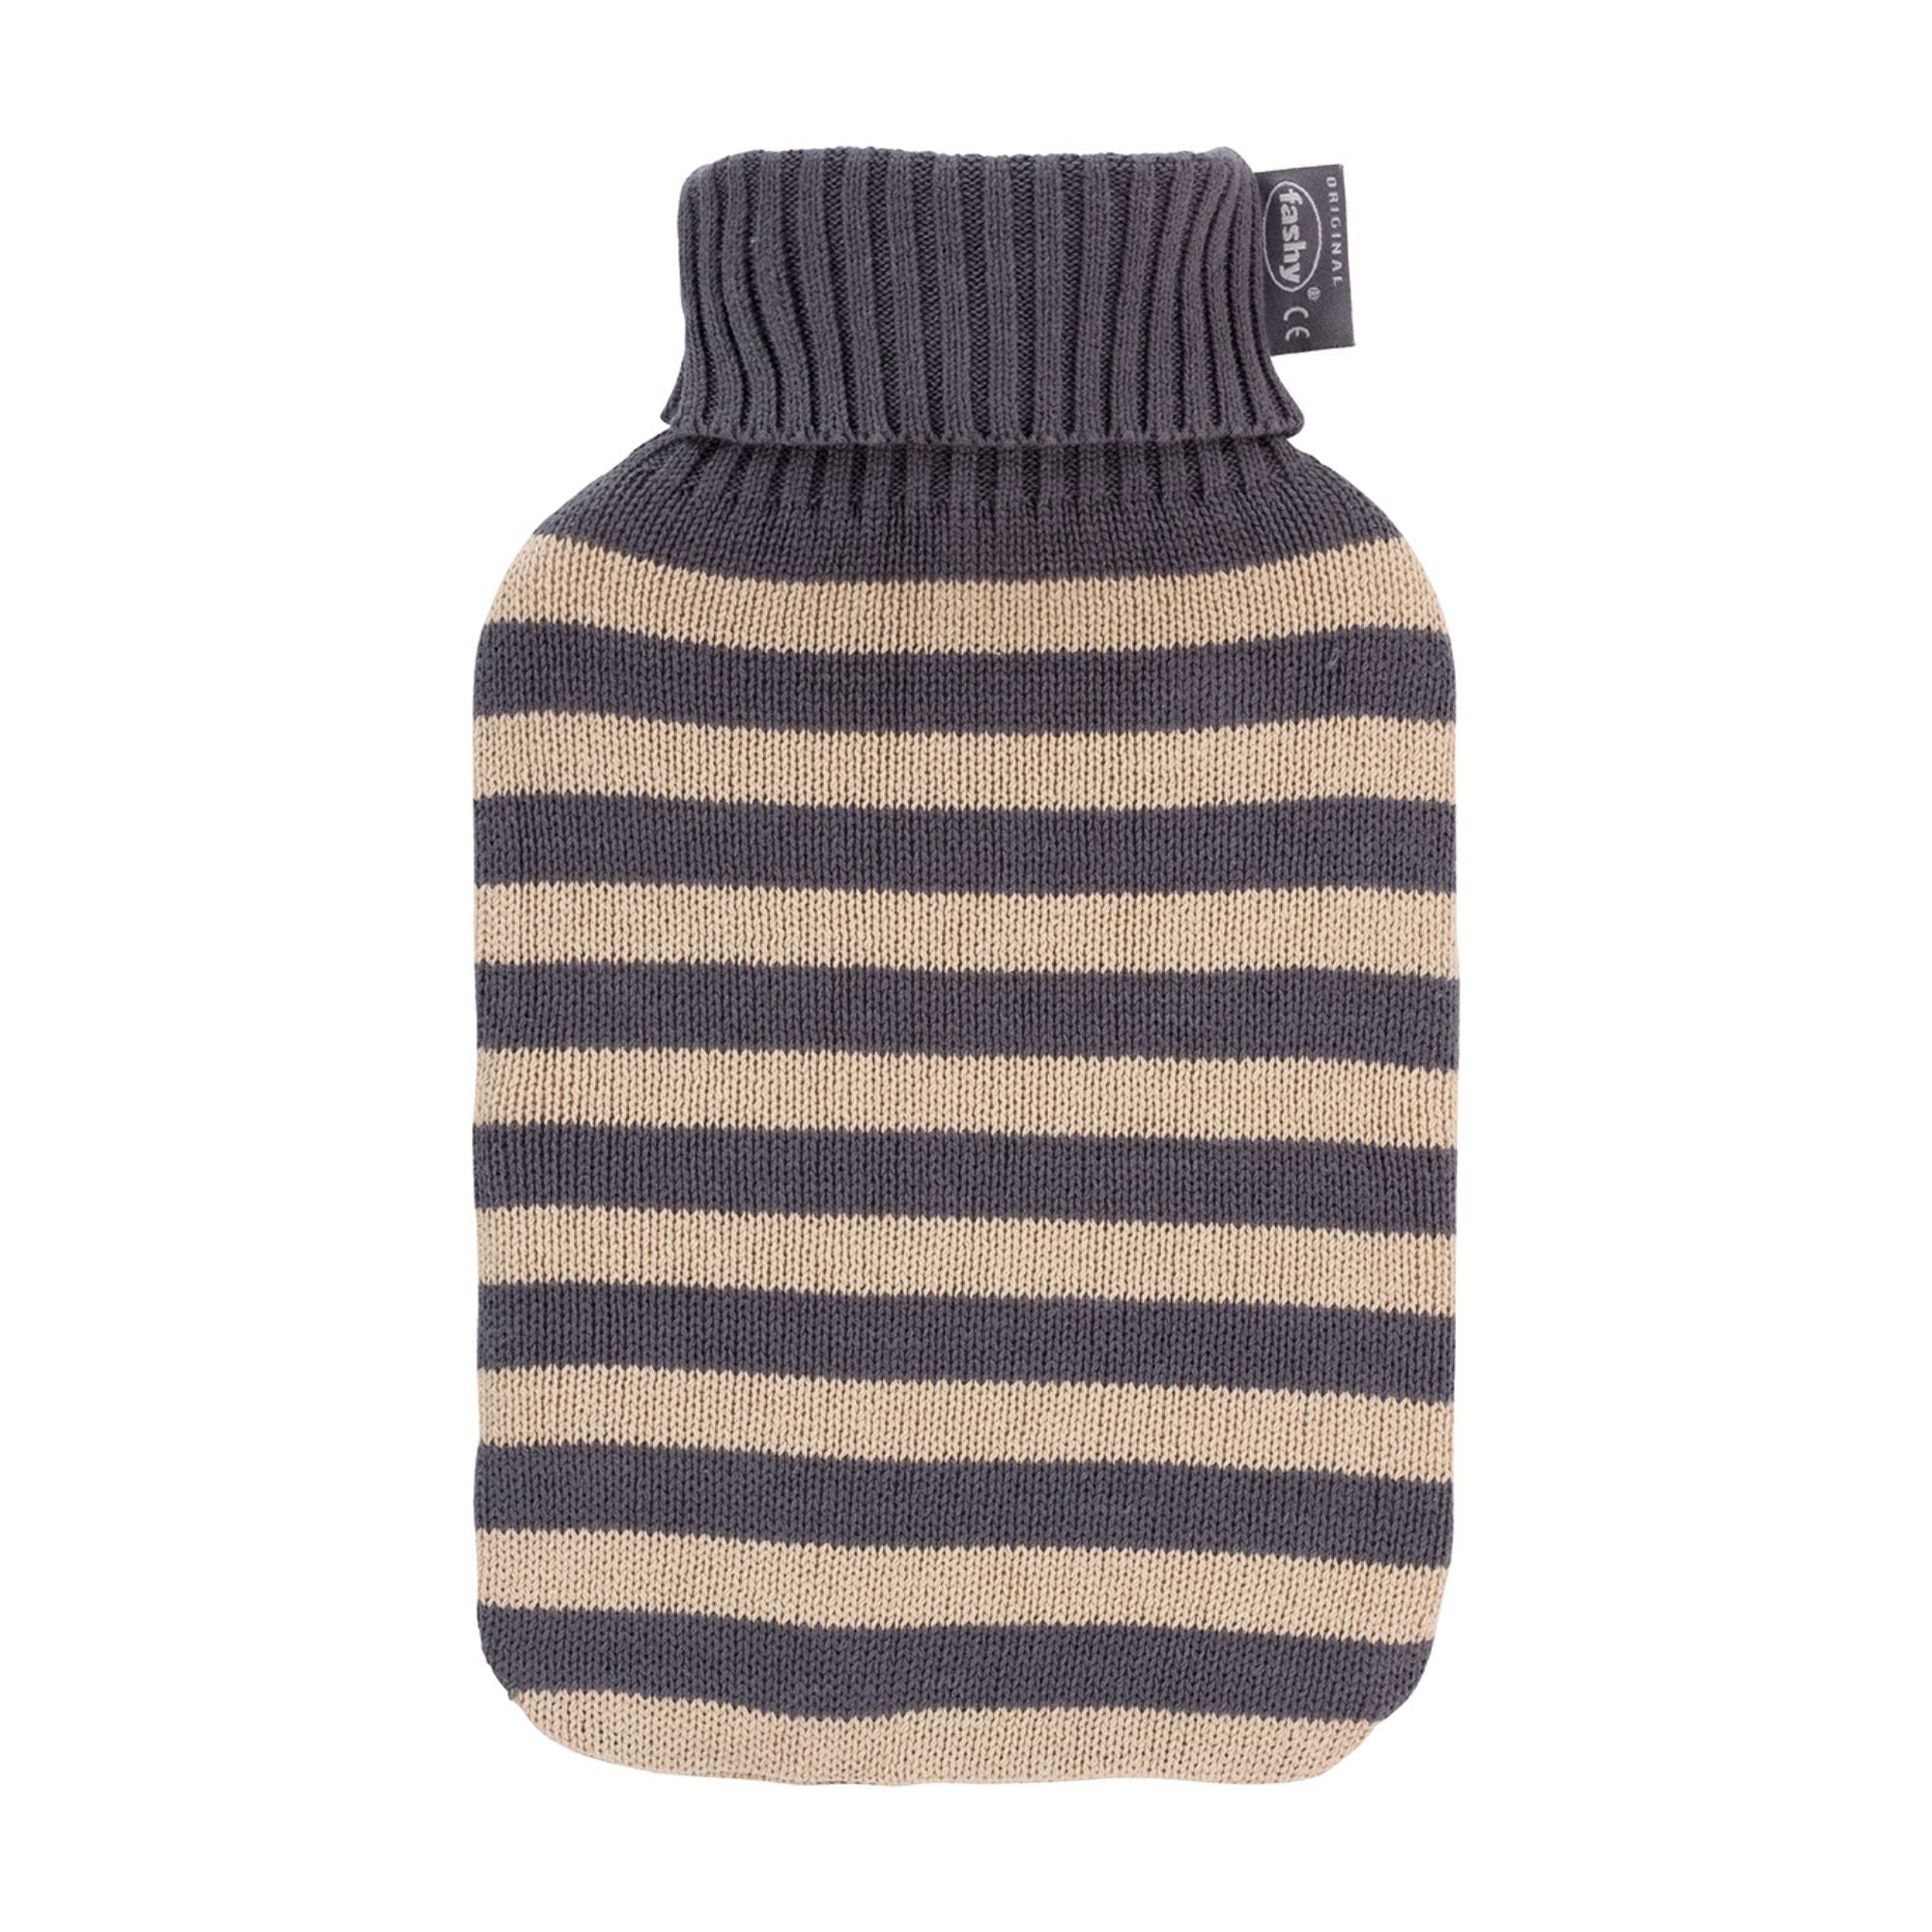 2 Litre Fashy Hot Water Bottle with Grey & Cream Stripe Turtle Neck Knitted Cotton Cover